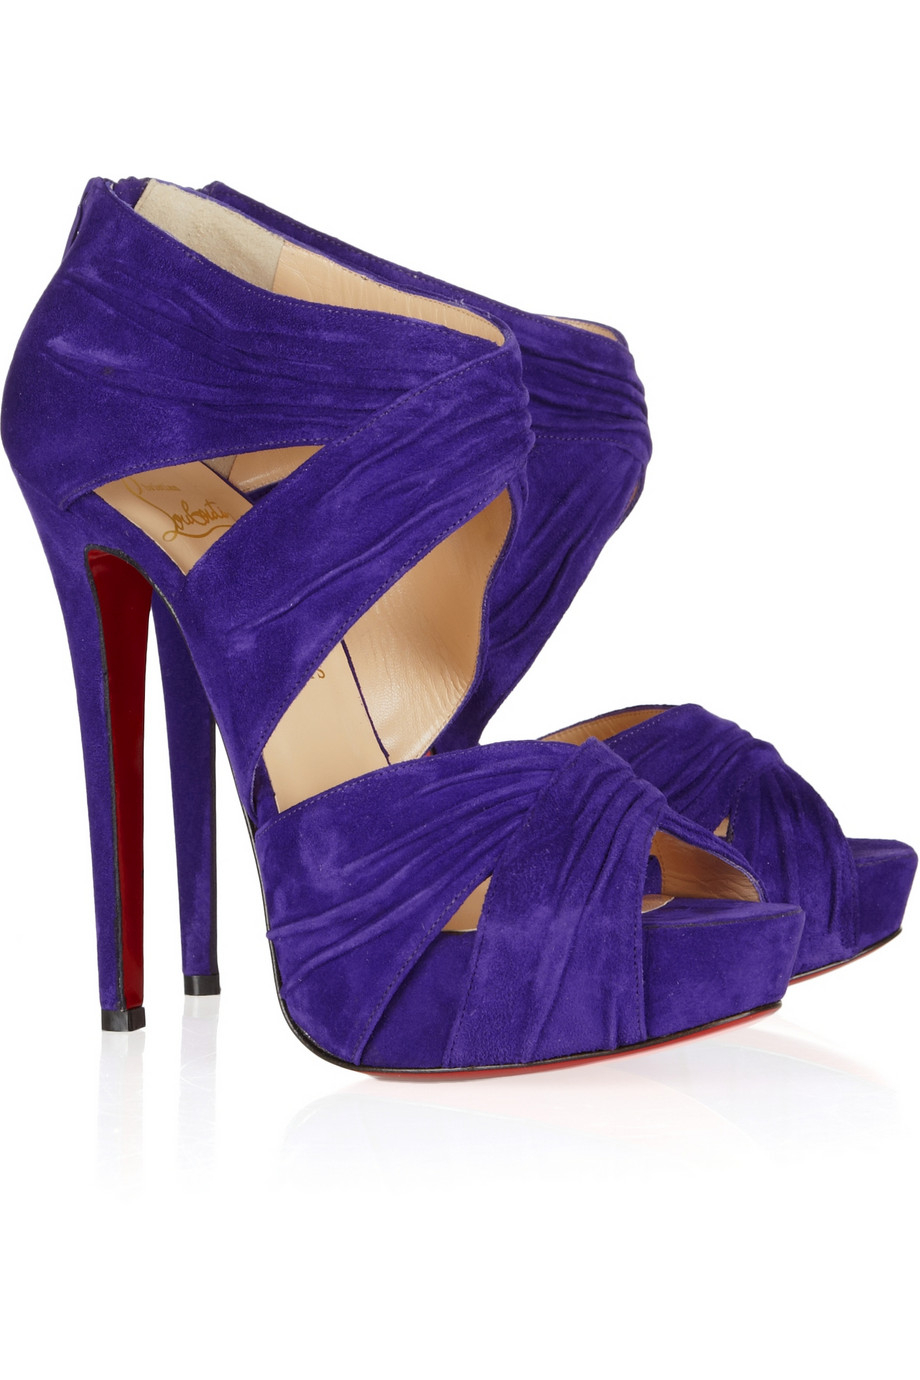 Christian Louboutin 140 Suede Sandals in Violet (Purple) - Lyst